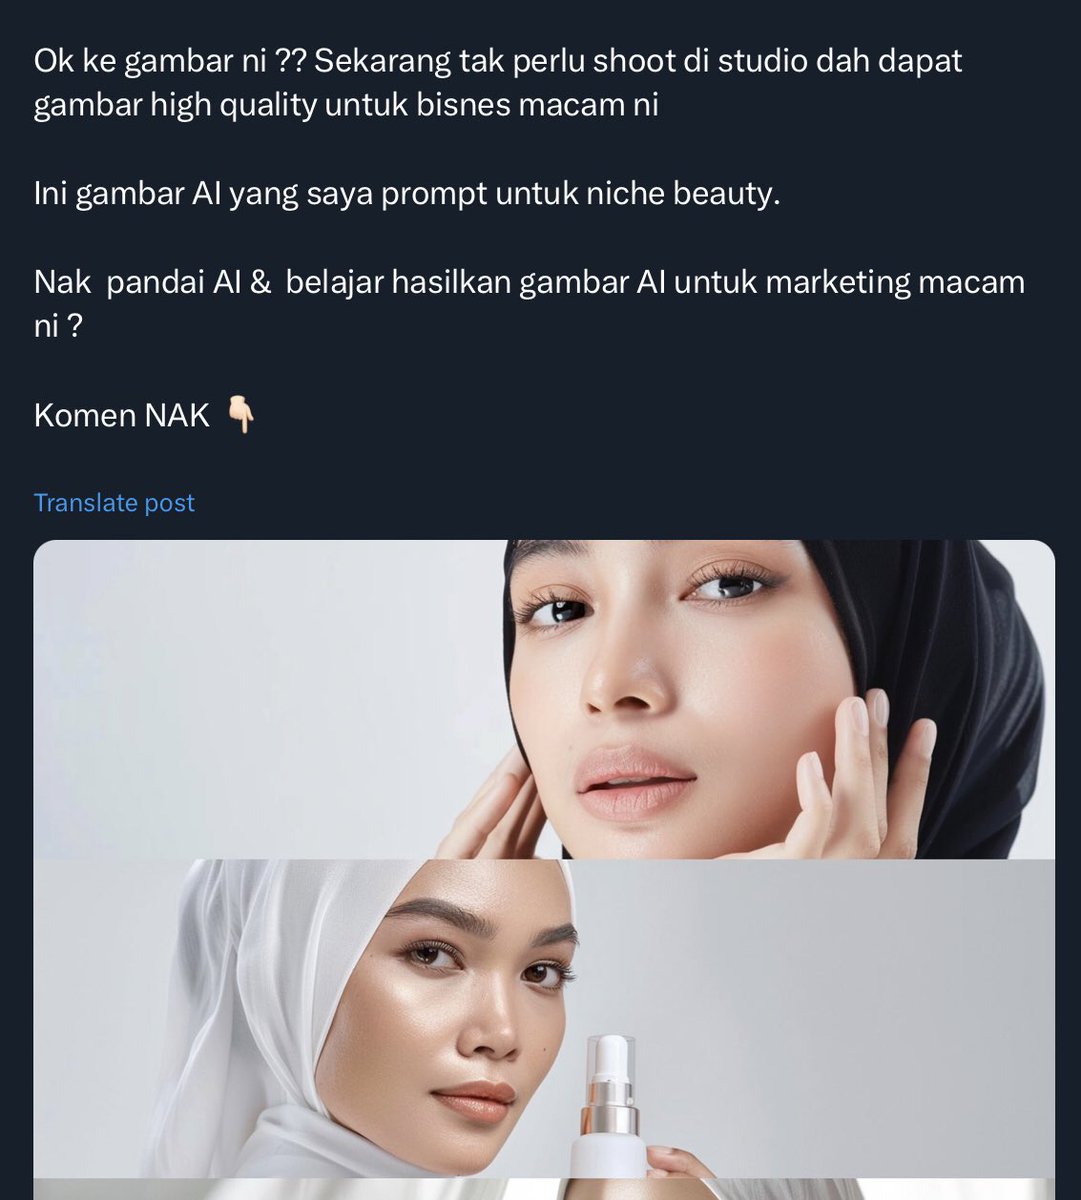 Any 'beauty' product selliing their merchs using ai model is basically false advertising because none of their shit is real lol don't put money where the prompters are because it's cheap ass shit products from broke ass businesses who can't hire professional creatives 🥱 girl bye